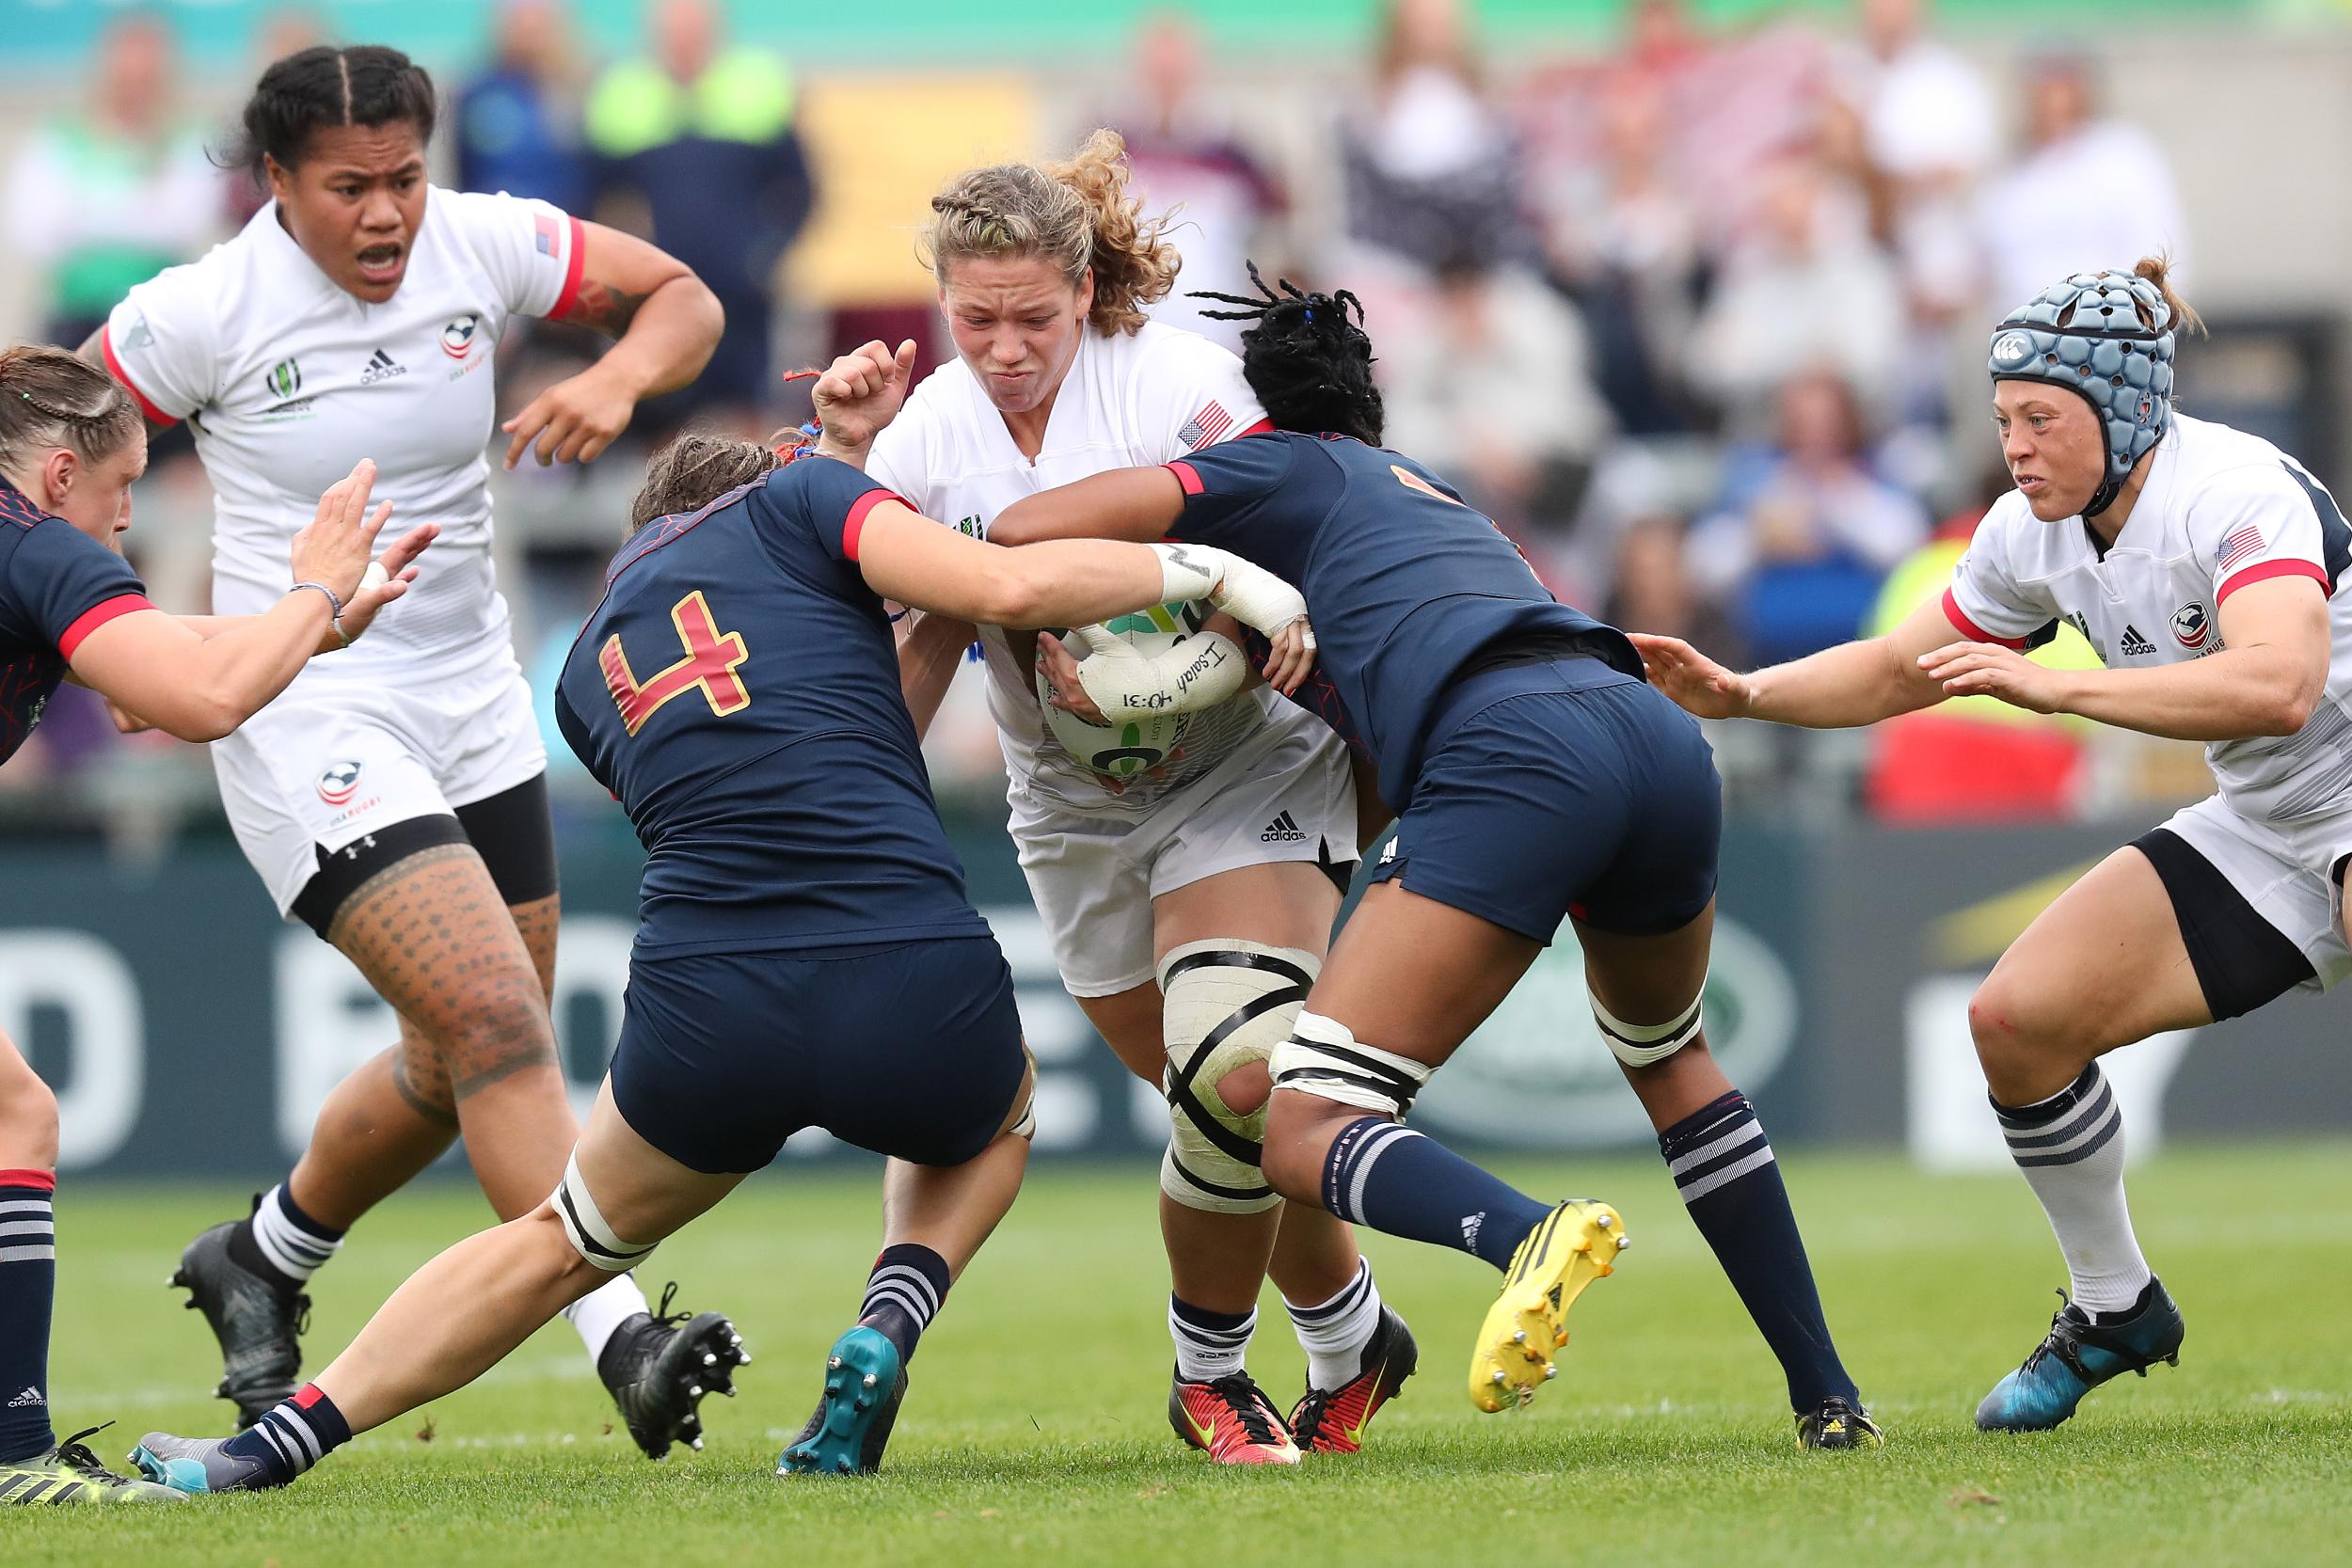 USA Finishes 4th at Women's Rugby World Cup After Narrow Loss to France ...